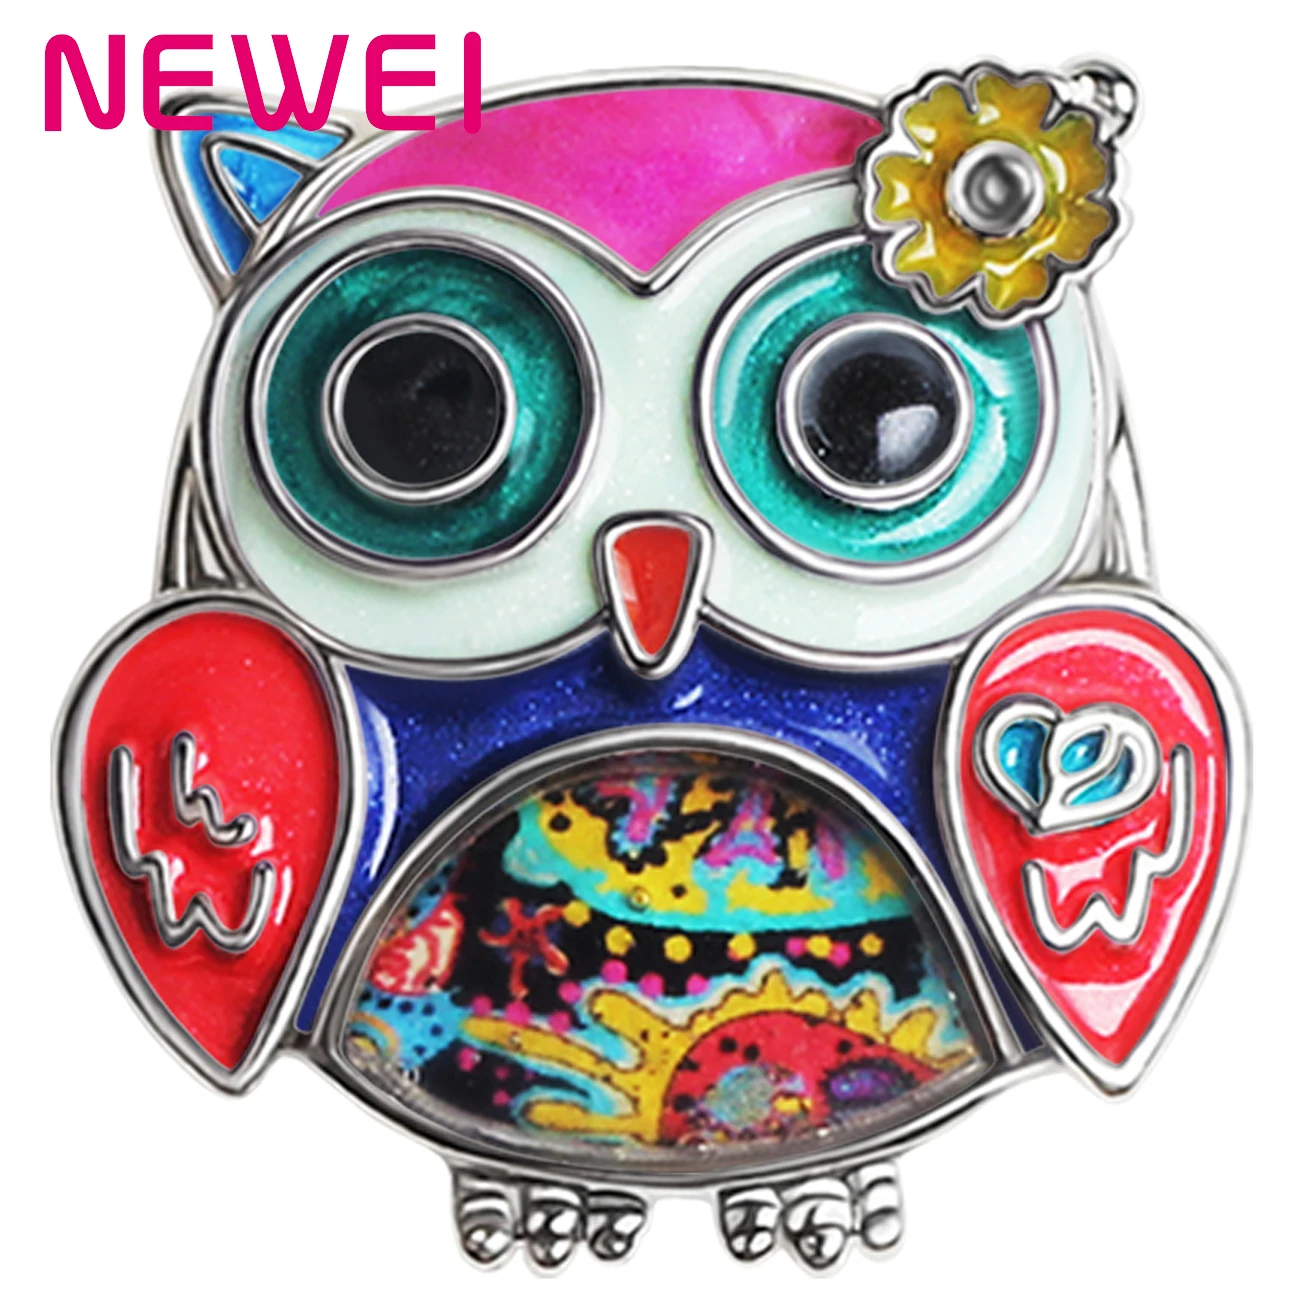 

NEWEI Enamel Alloy Mental Floral Cute Fatty Owl Birds Brooches Big Pin Scarf Bag Charm Gift Jewelry For Women Teens Girls Party